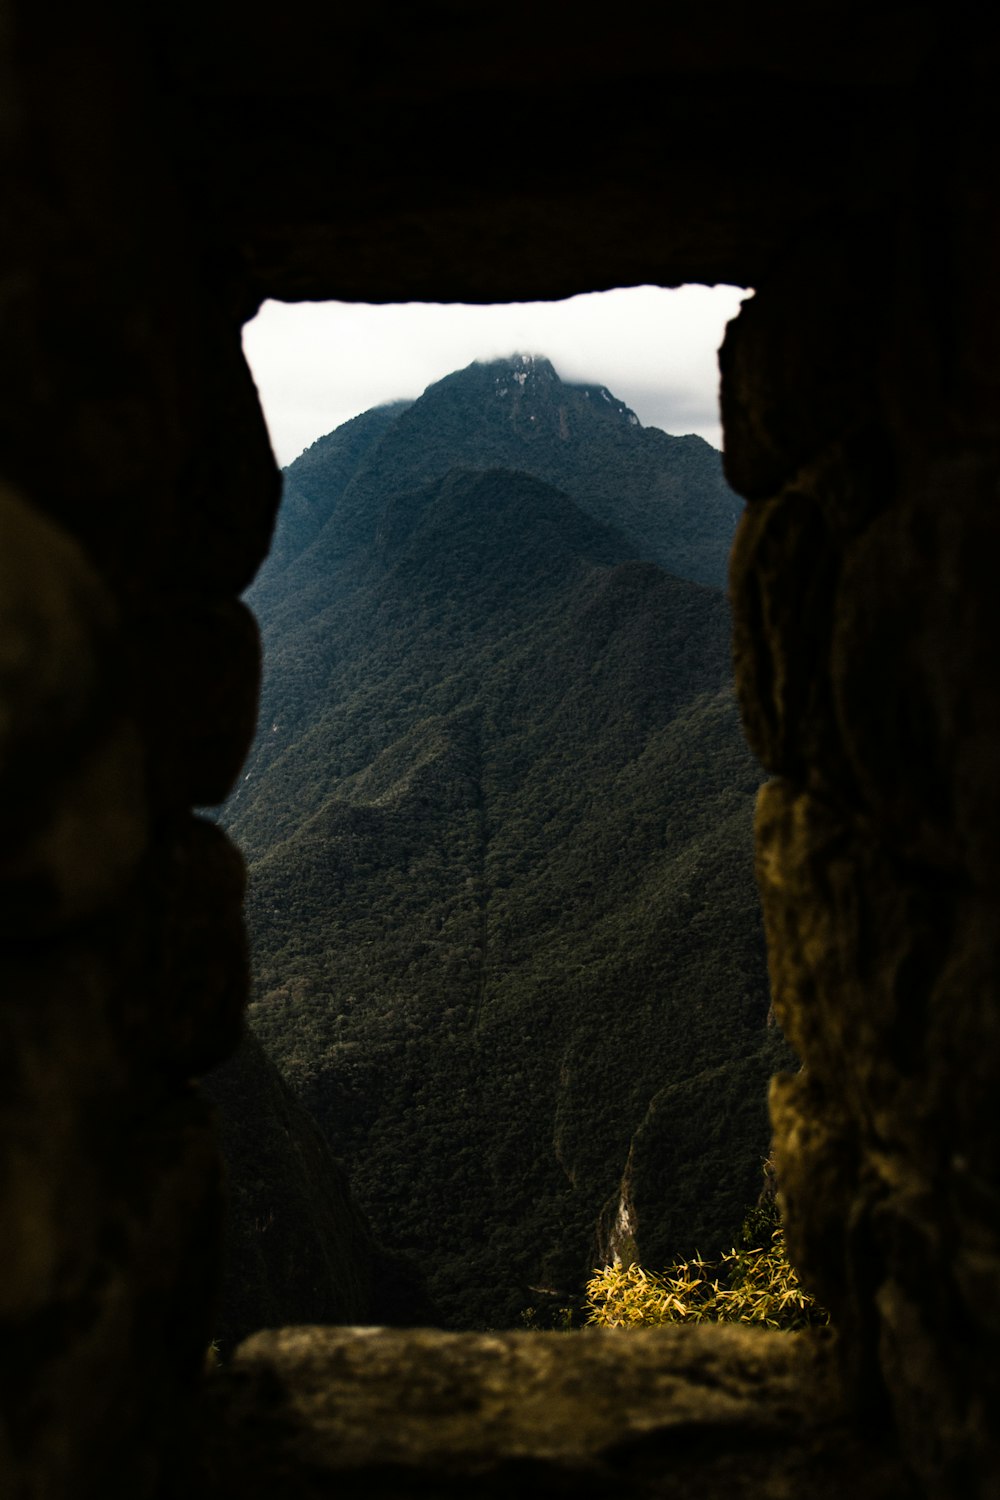 a view of mountains through a window in a stone wall